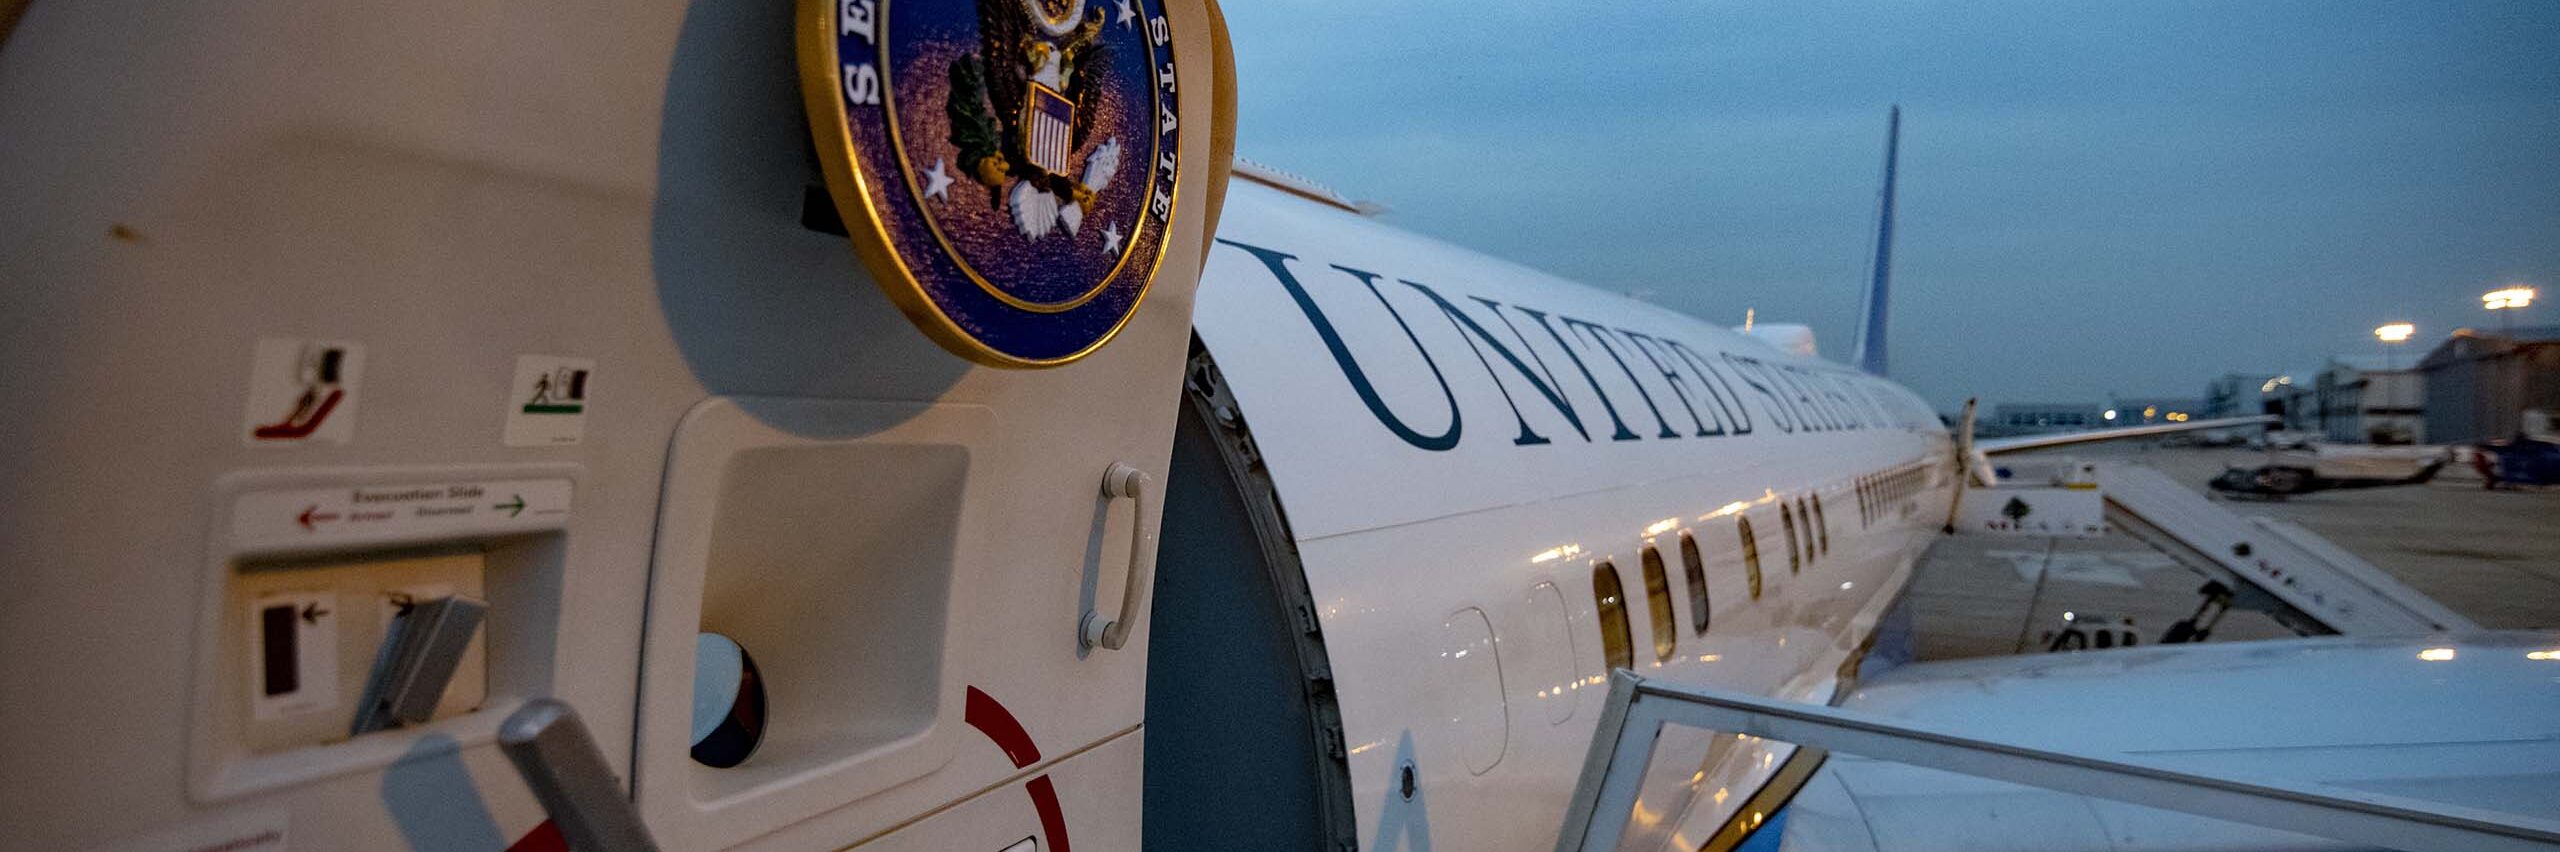 U.S. Secretary of State prepares to depart Beirut en route to Washington, D.C., on March 23, 2019. [State Department photo by Ron Przysucha/ Public Domain]